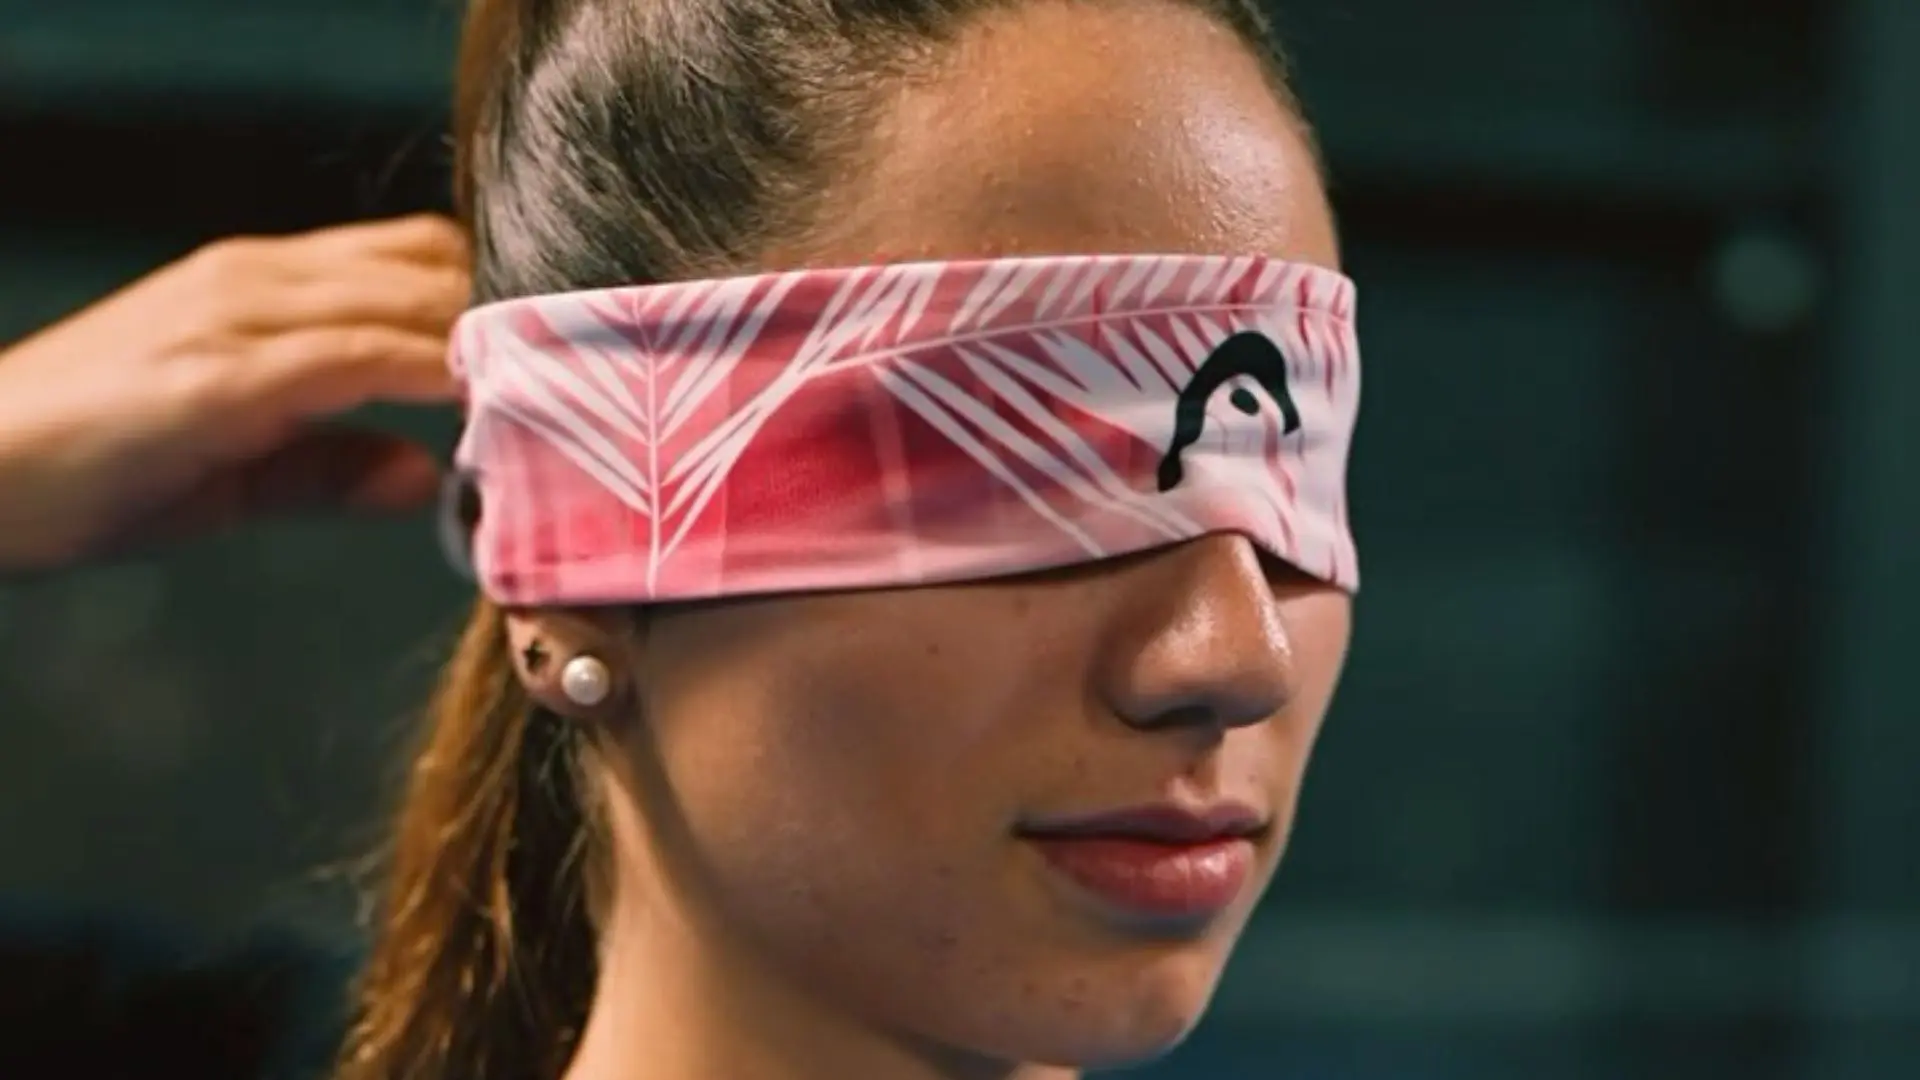 Would you be able to recognize your racket blindfolded?